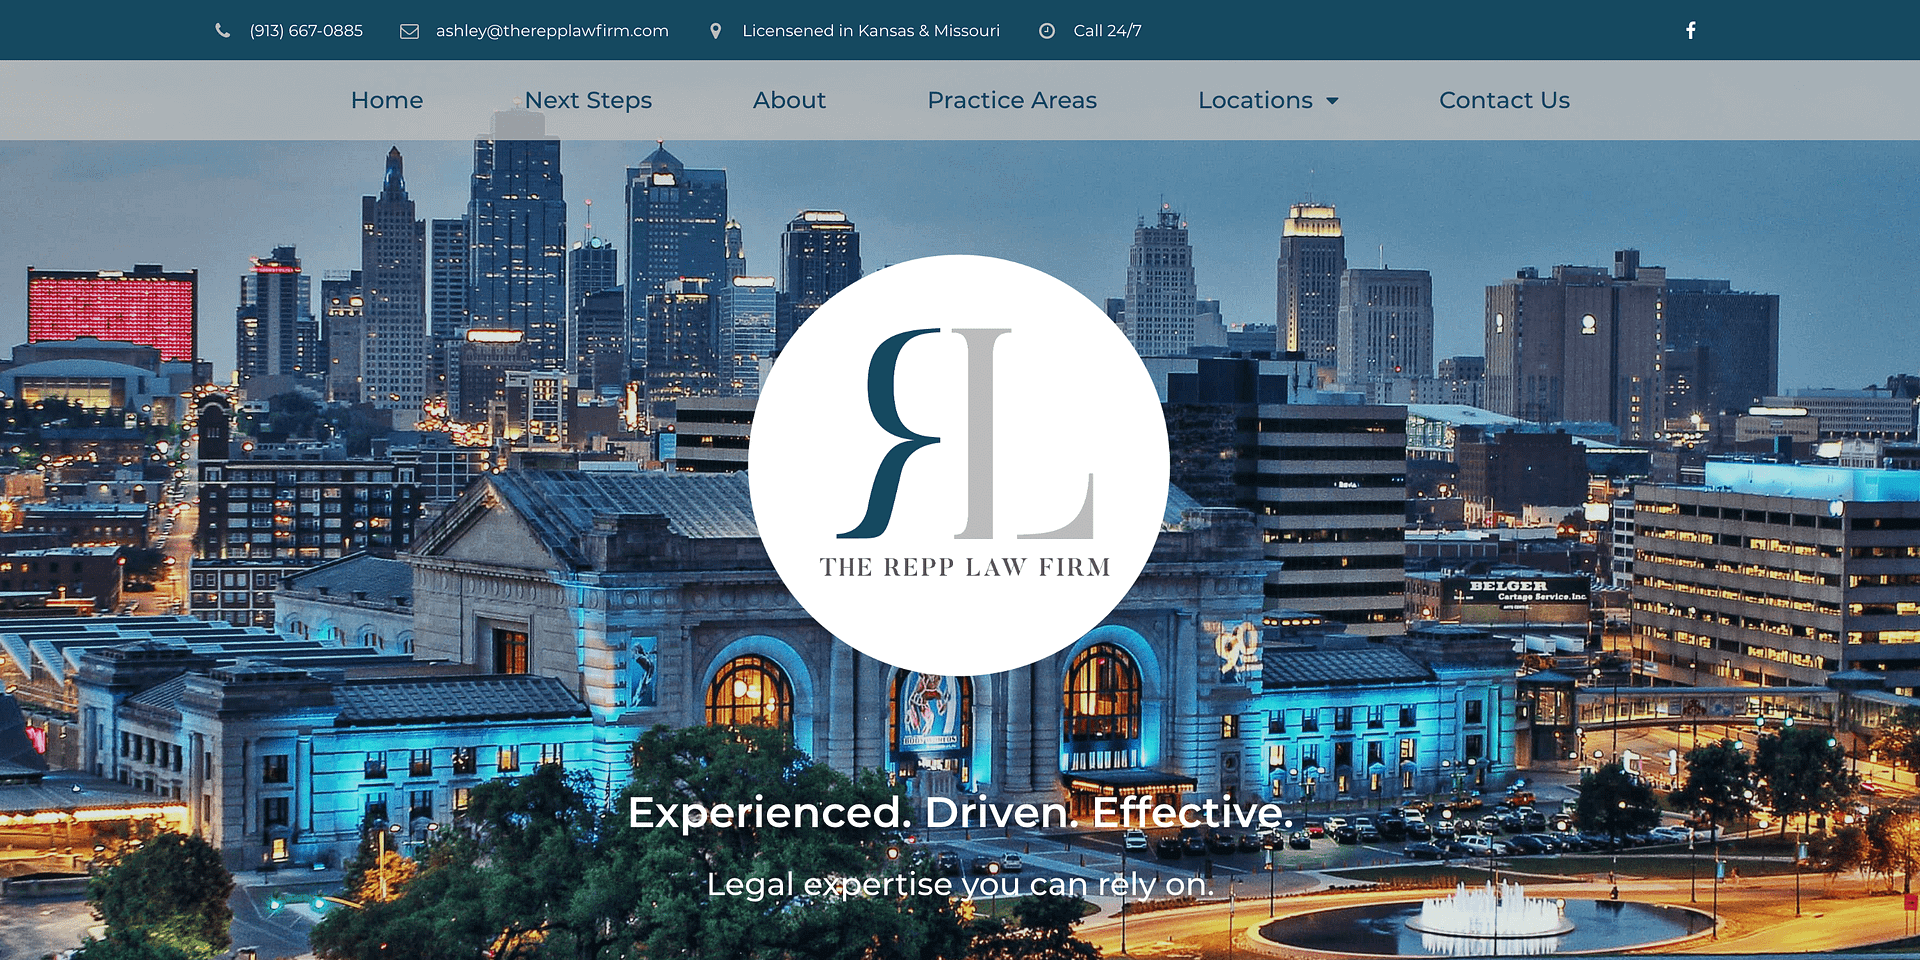 The Repp Law Firm Website